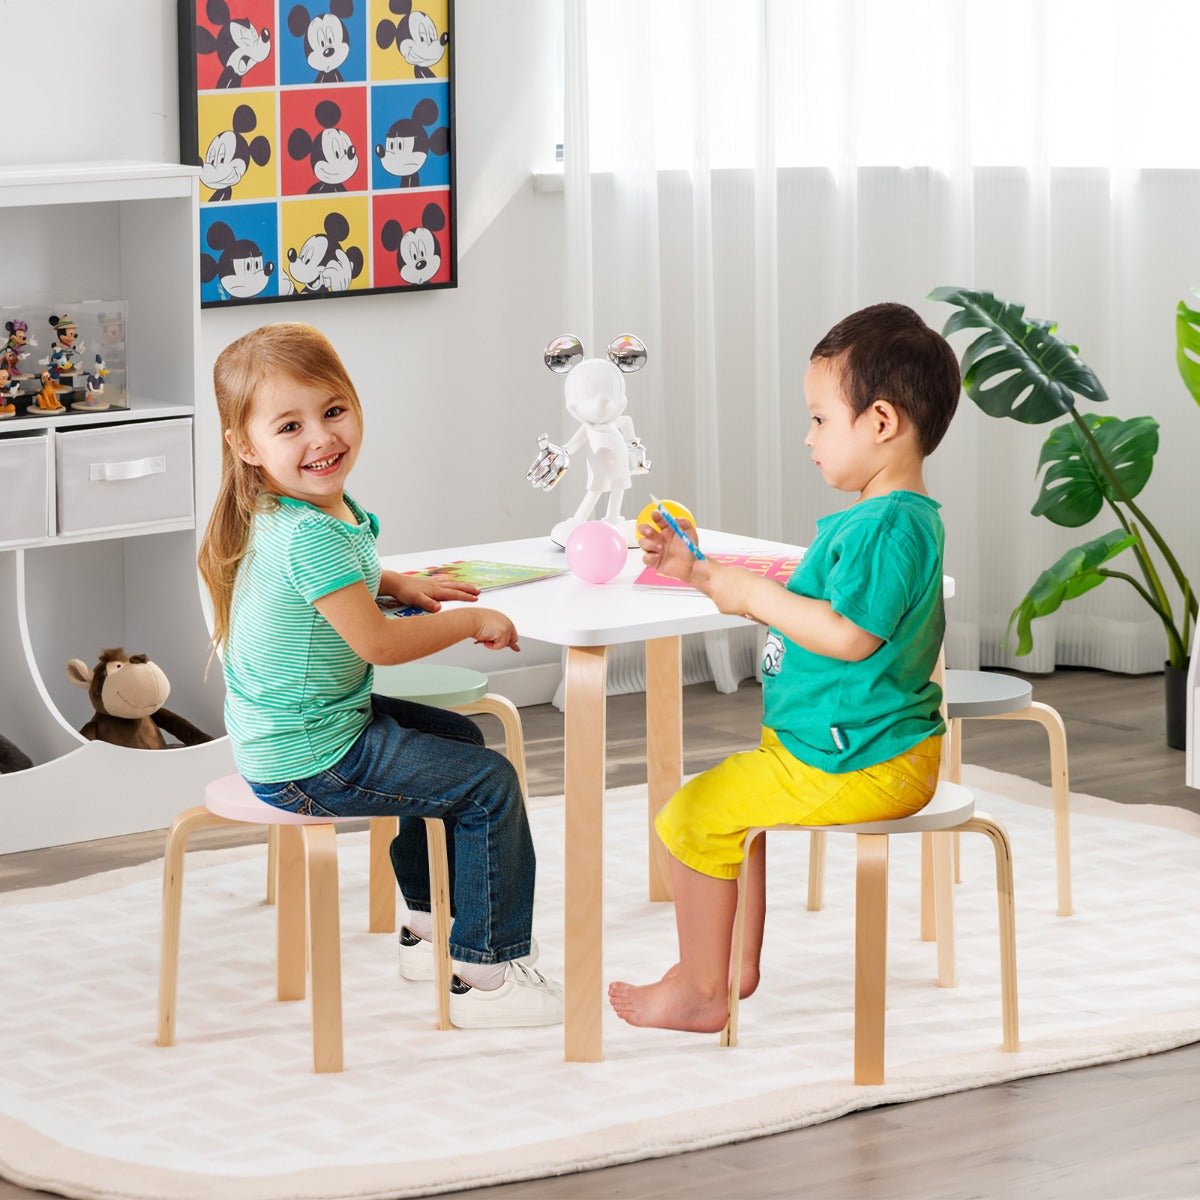 Whimsical Kids Furniture: Macaroon 5-Piece Table & Chair Set for Playful Rooms